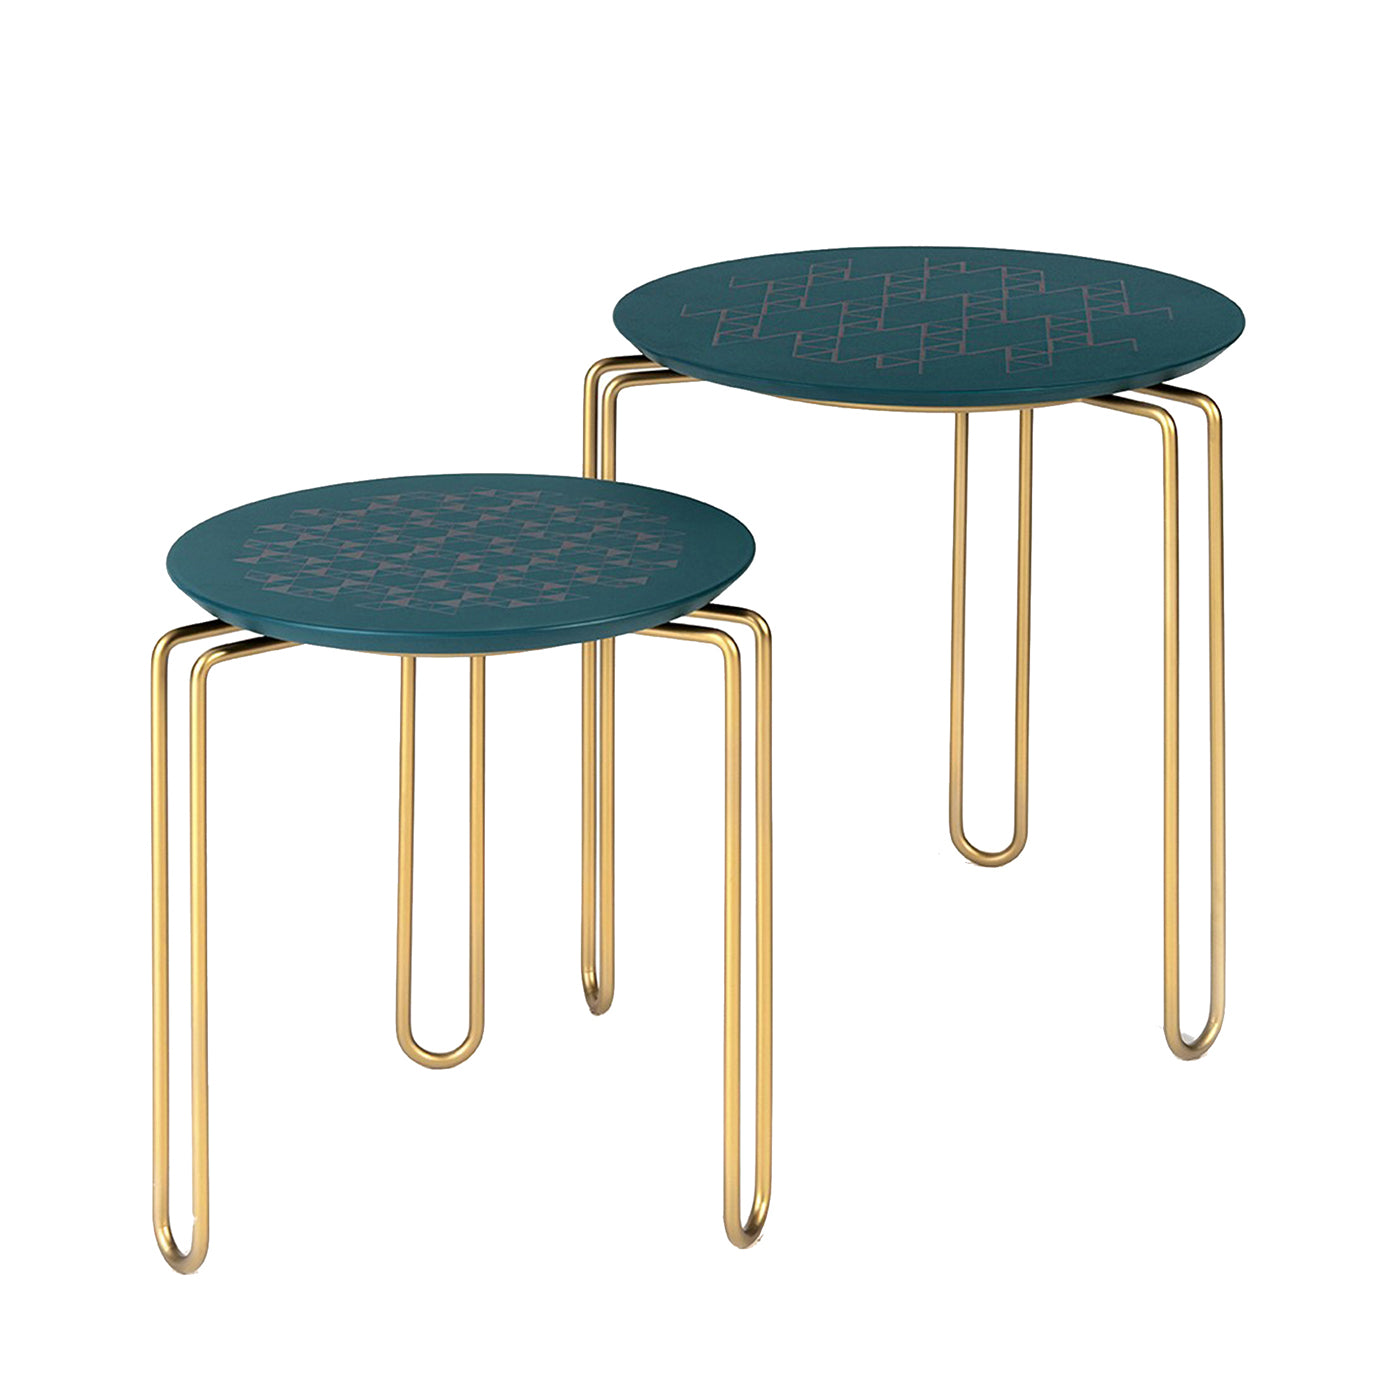 Caleido Set of 2 Green and Brass Side Tables - Main view